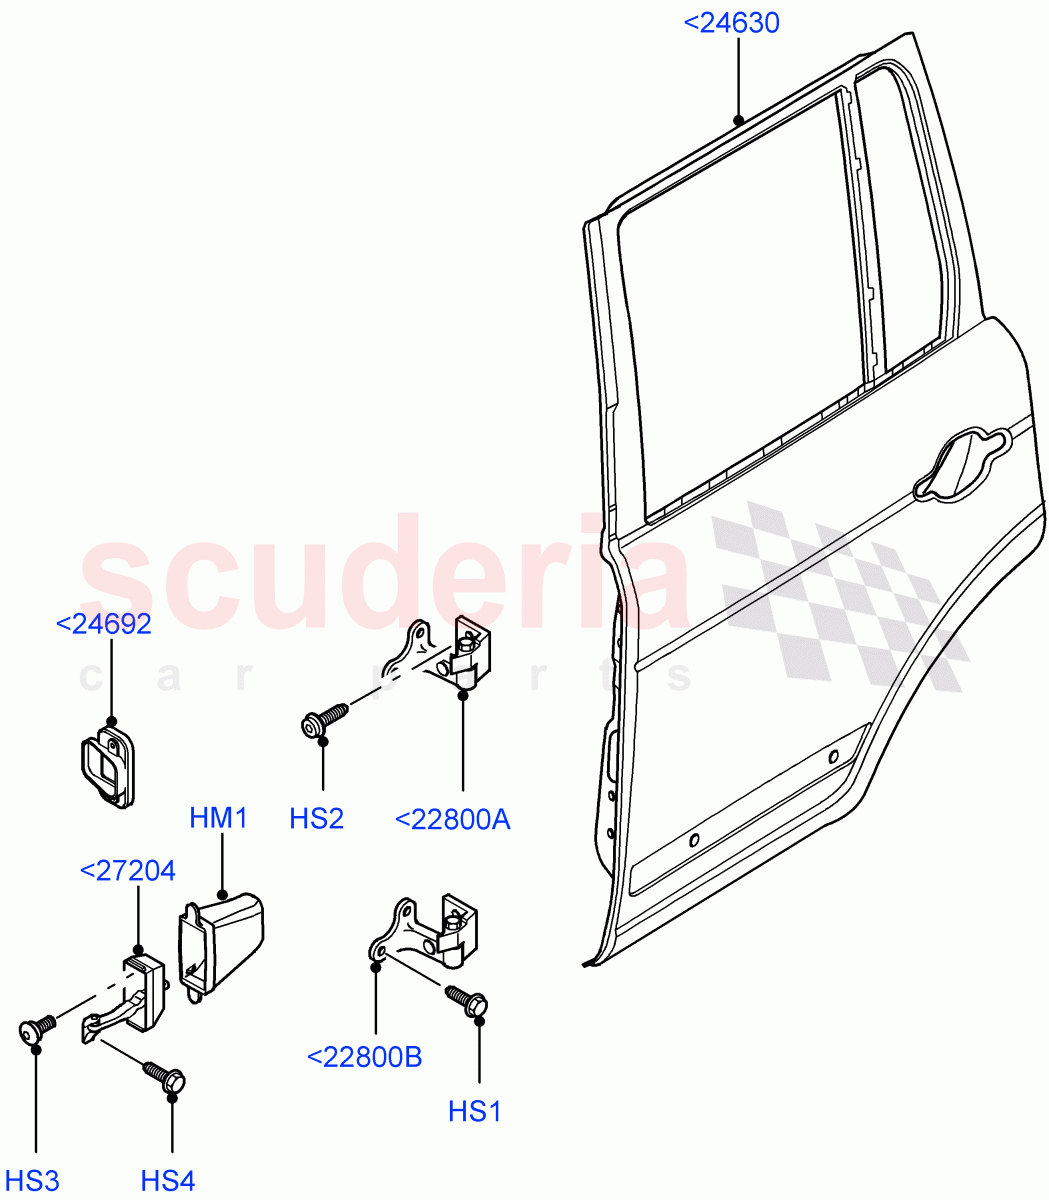 Rear Doors, Hinges & Weatherstrips(Door And Fixings)((V)FROMAA000001) of Land Rover Land Rover Range Rover (2010-2012) [5.0 OHC SGDI NA V8 Petrol]